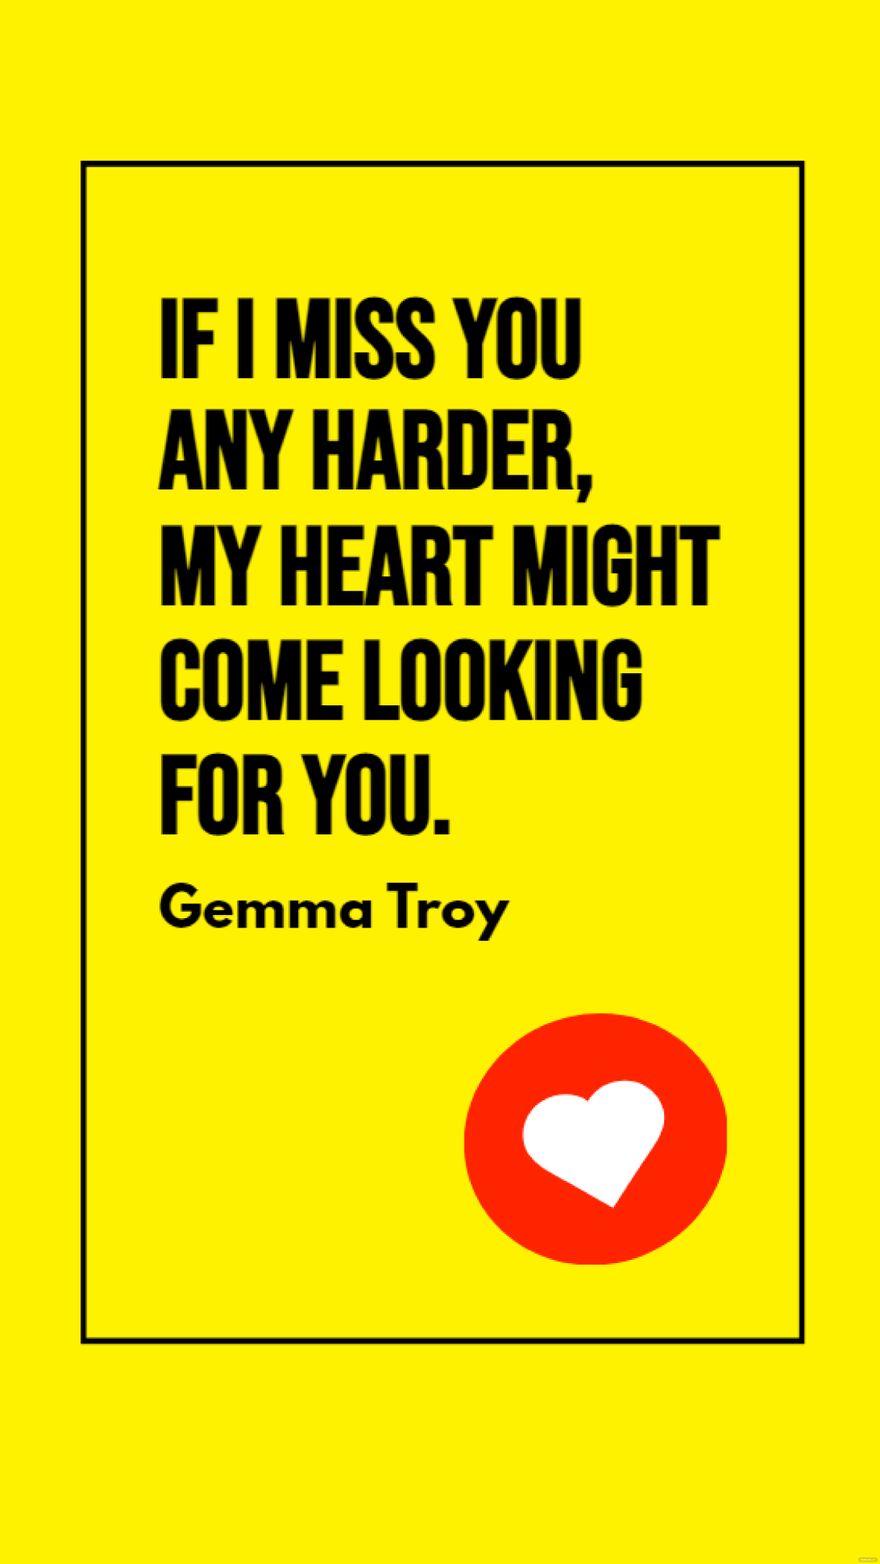 Gemma Troy - If I miss you any harder, my heart might come looking for you.